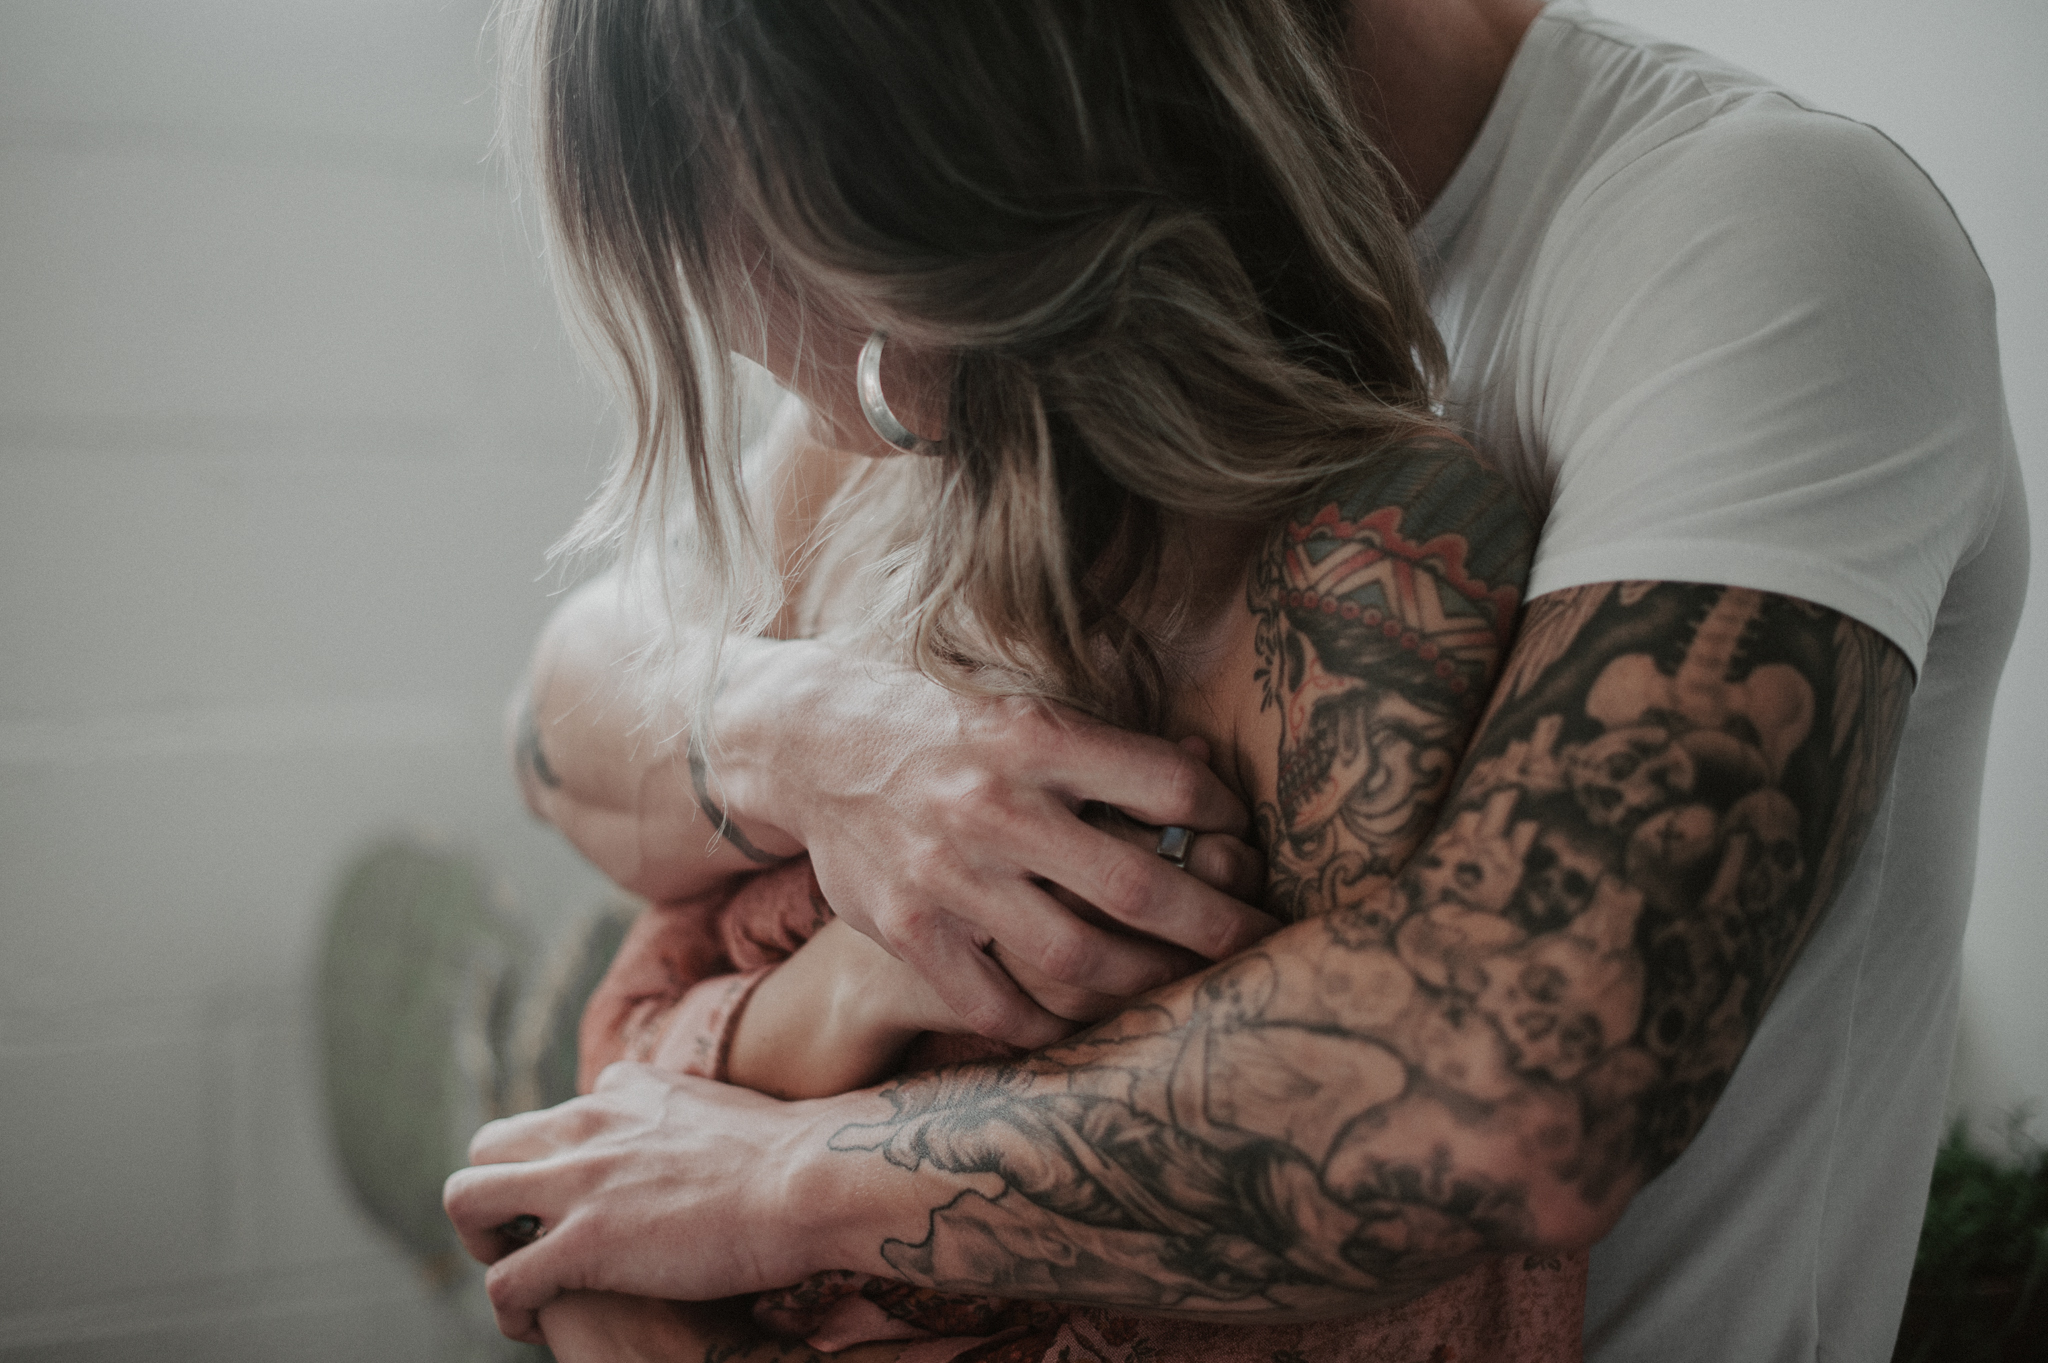 Tattooed Couple wrapping arms around each other